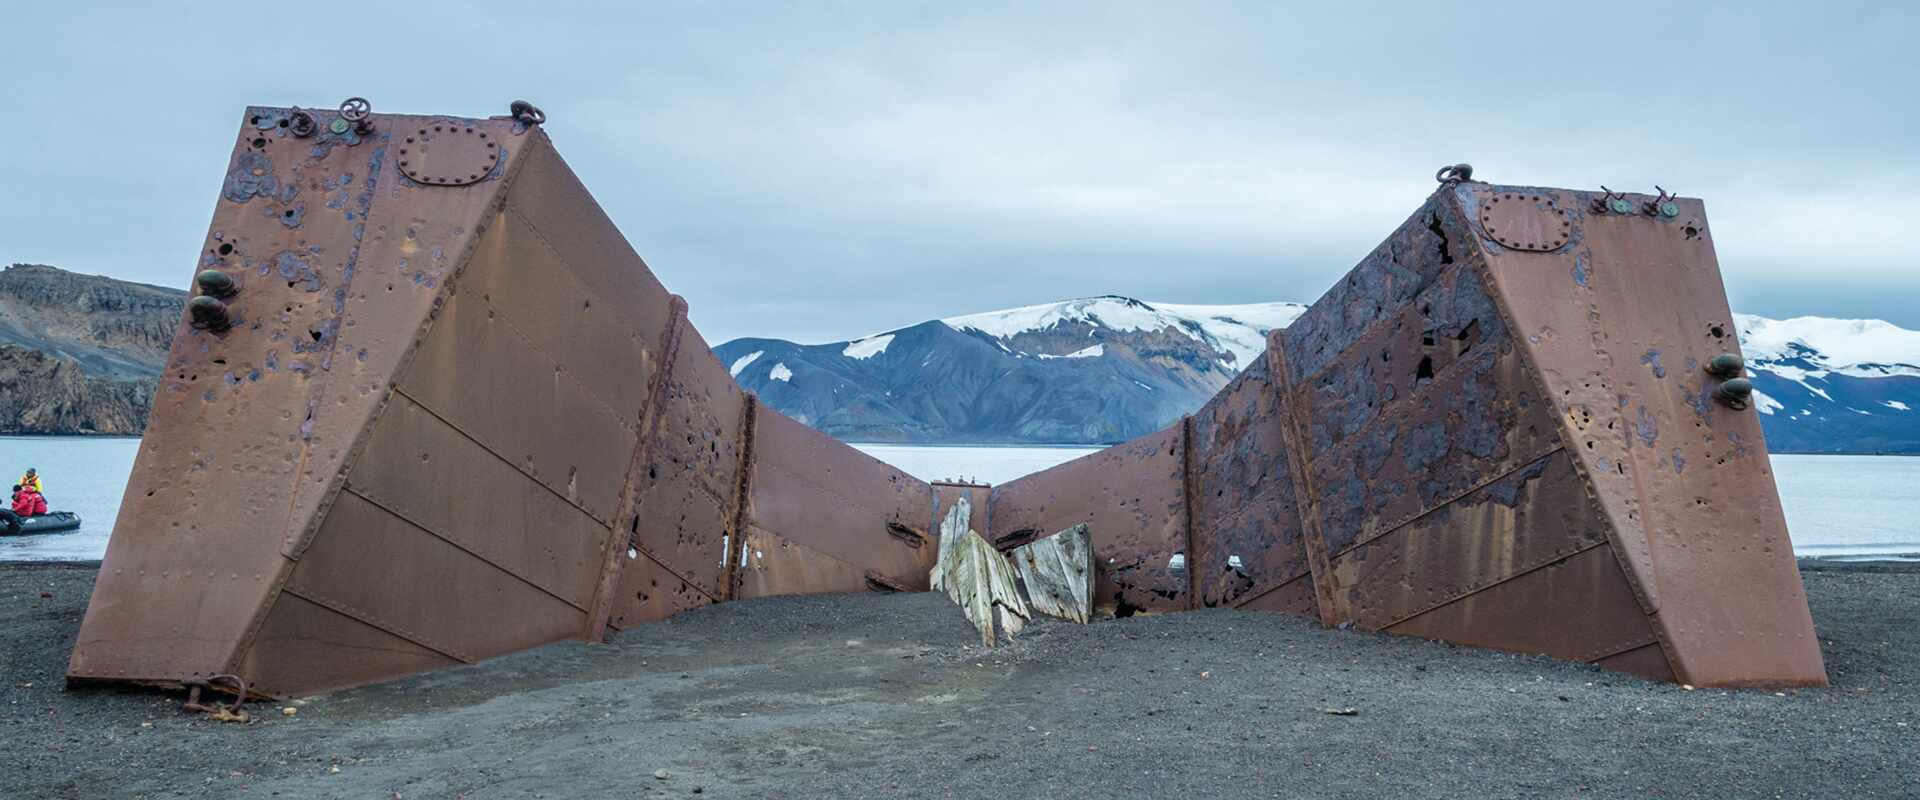 View of rusted ship, deception island